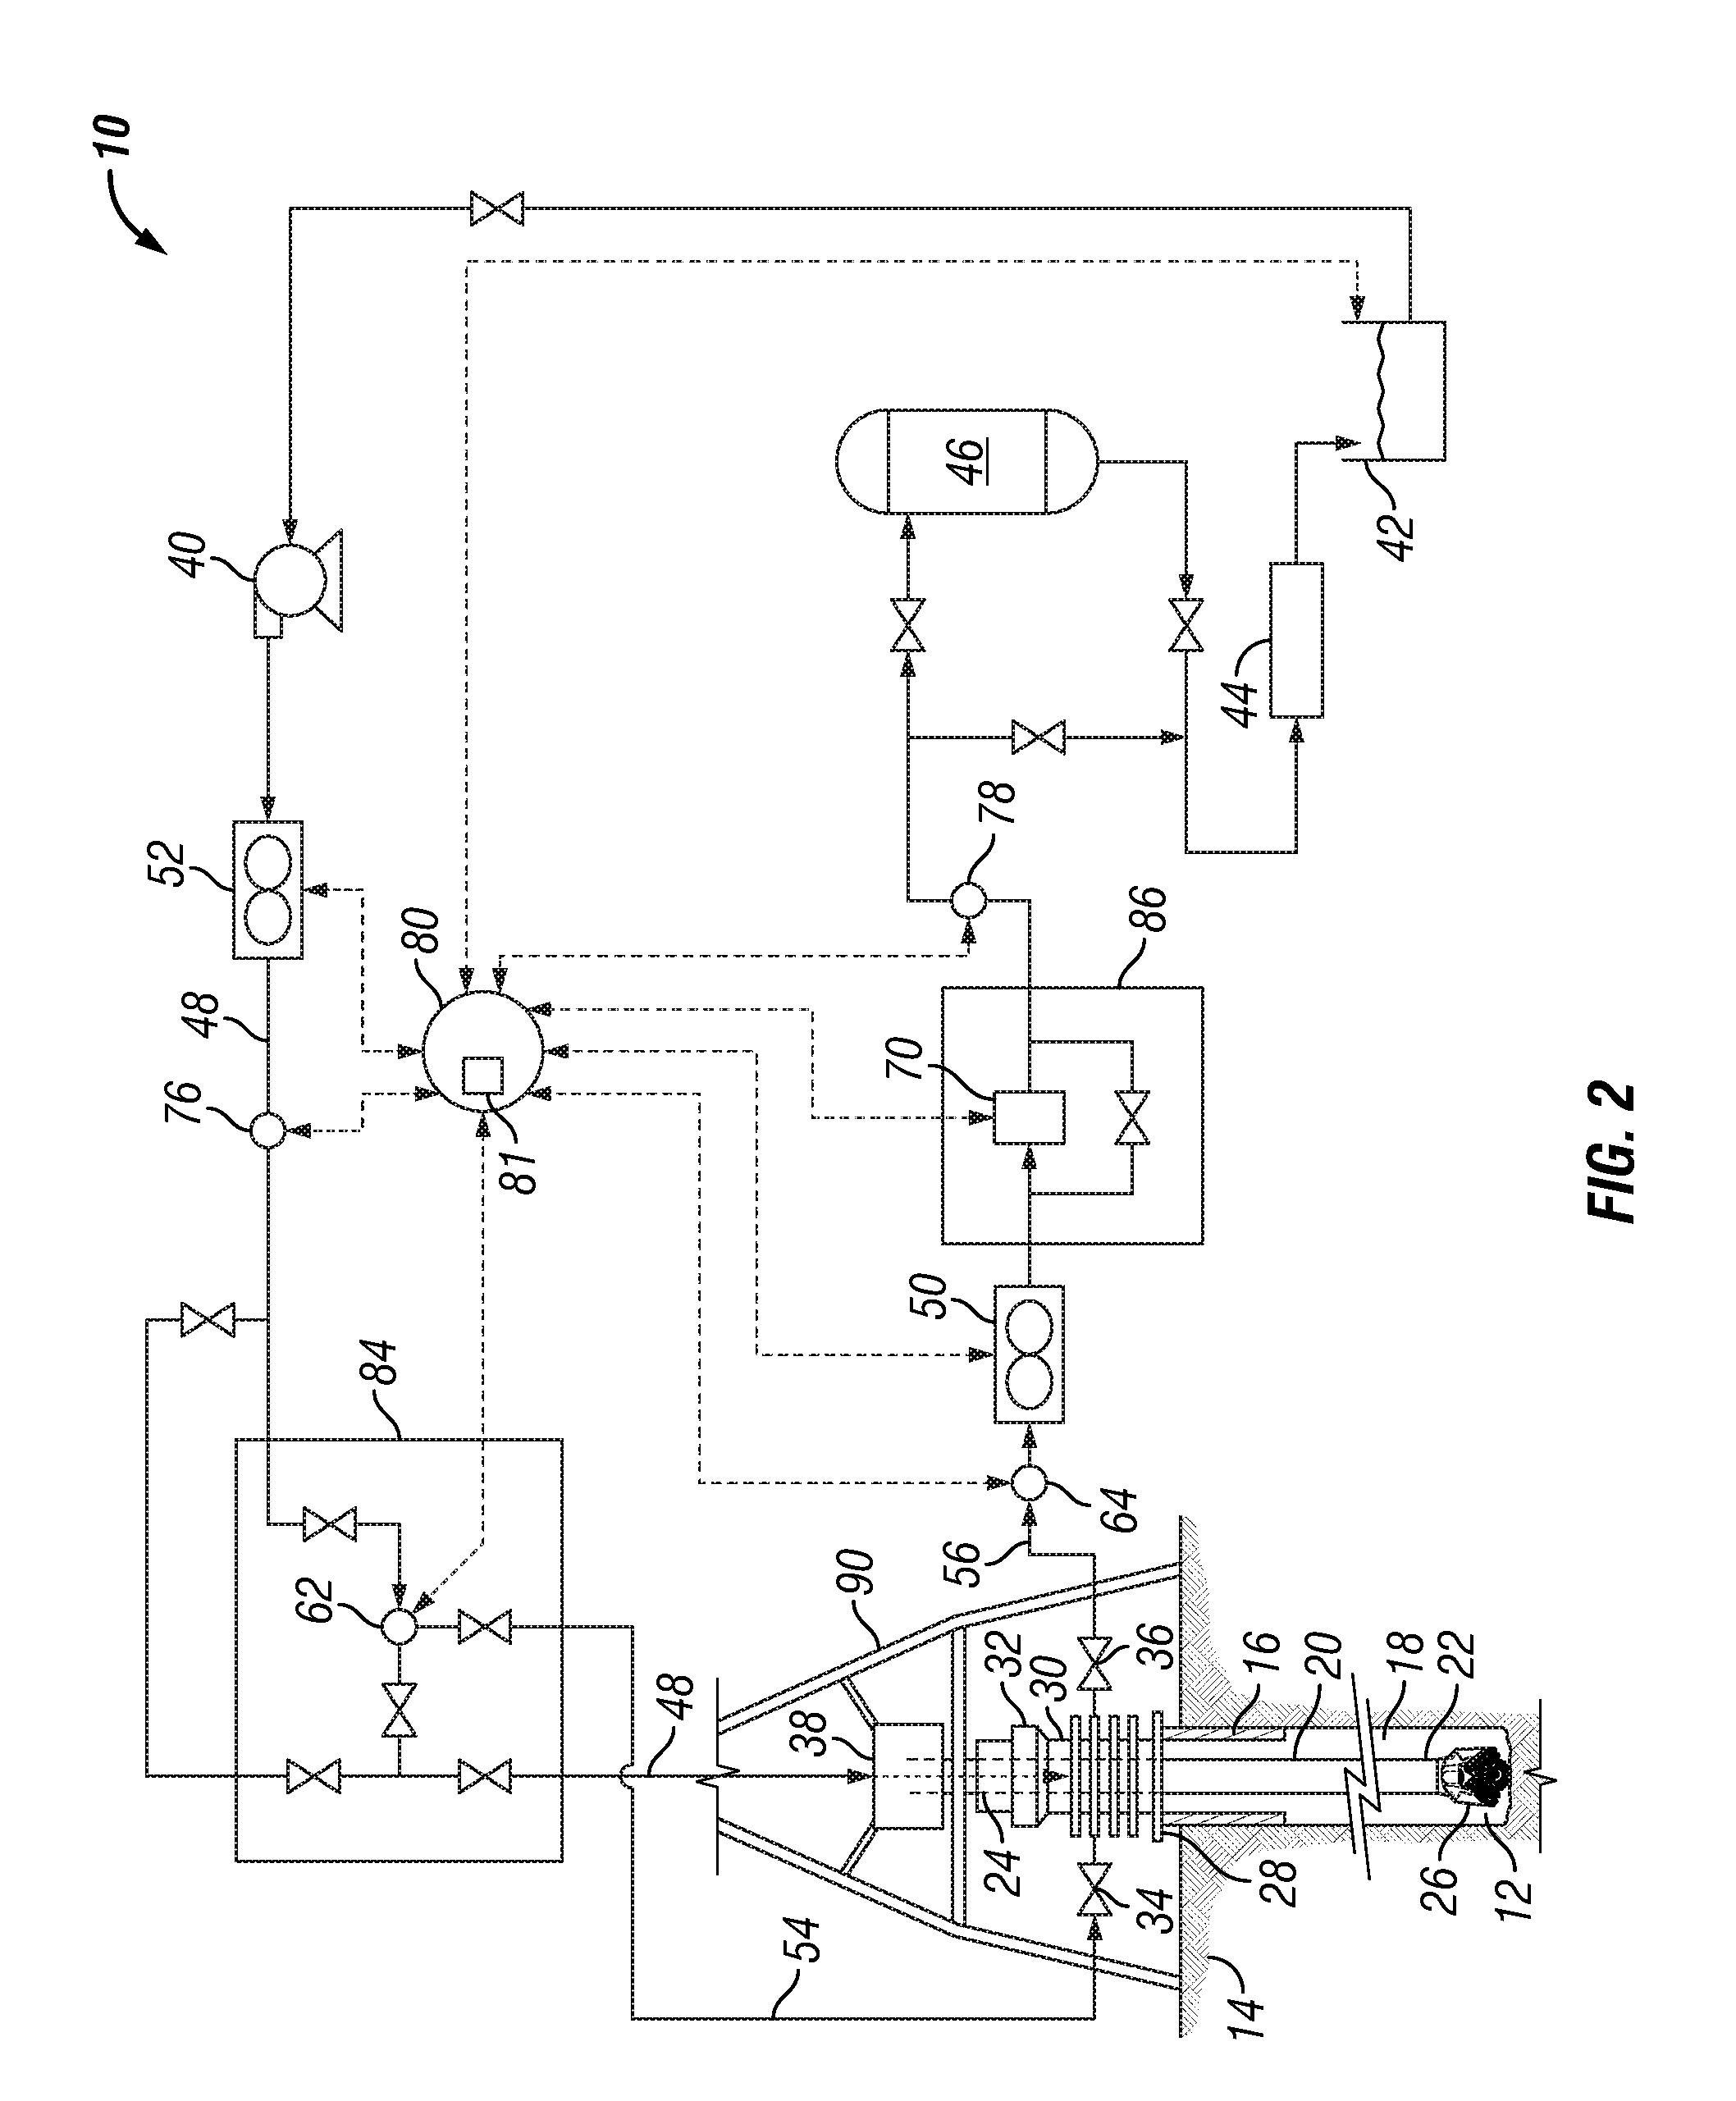 System and method for safe well control operations